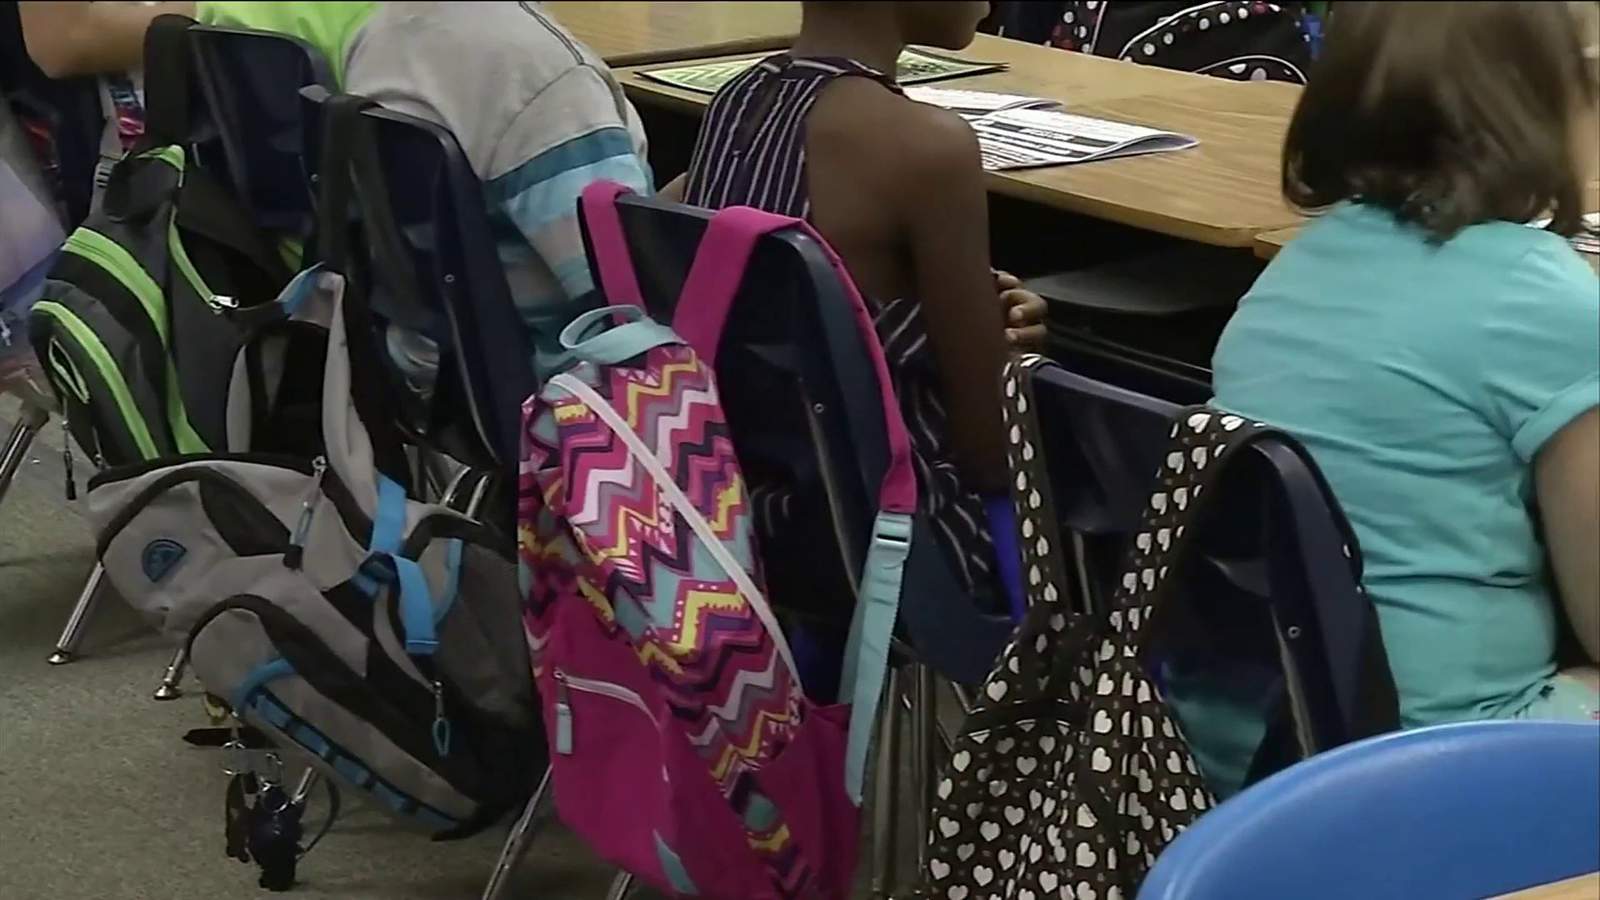 Florida educators want schools to test students for COVID-19